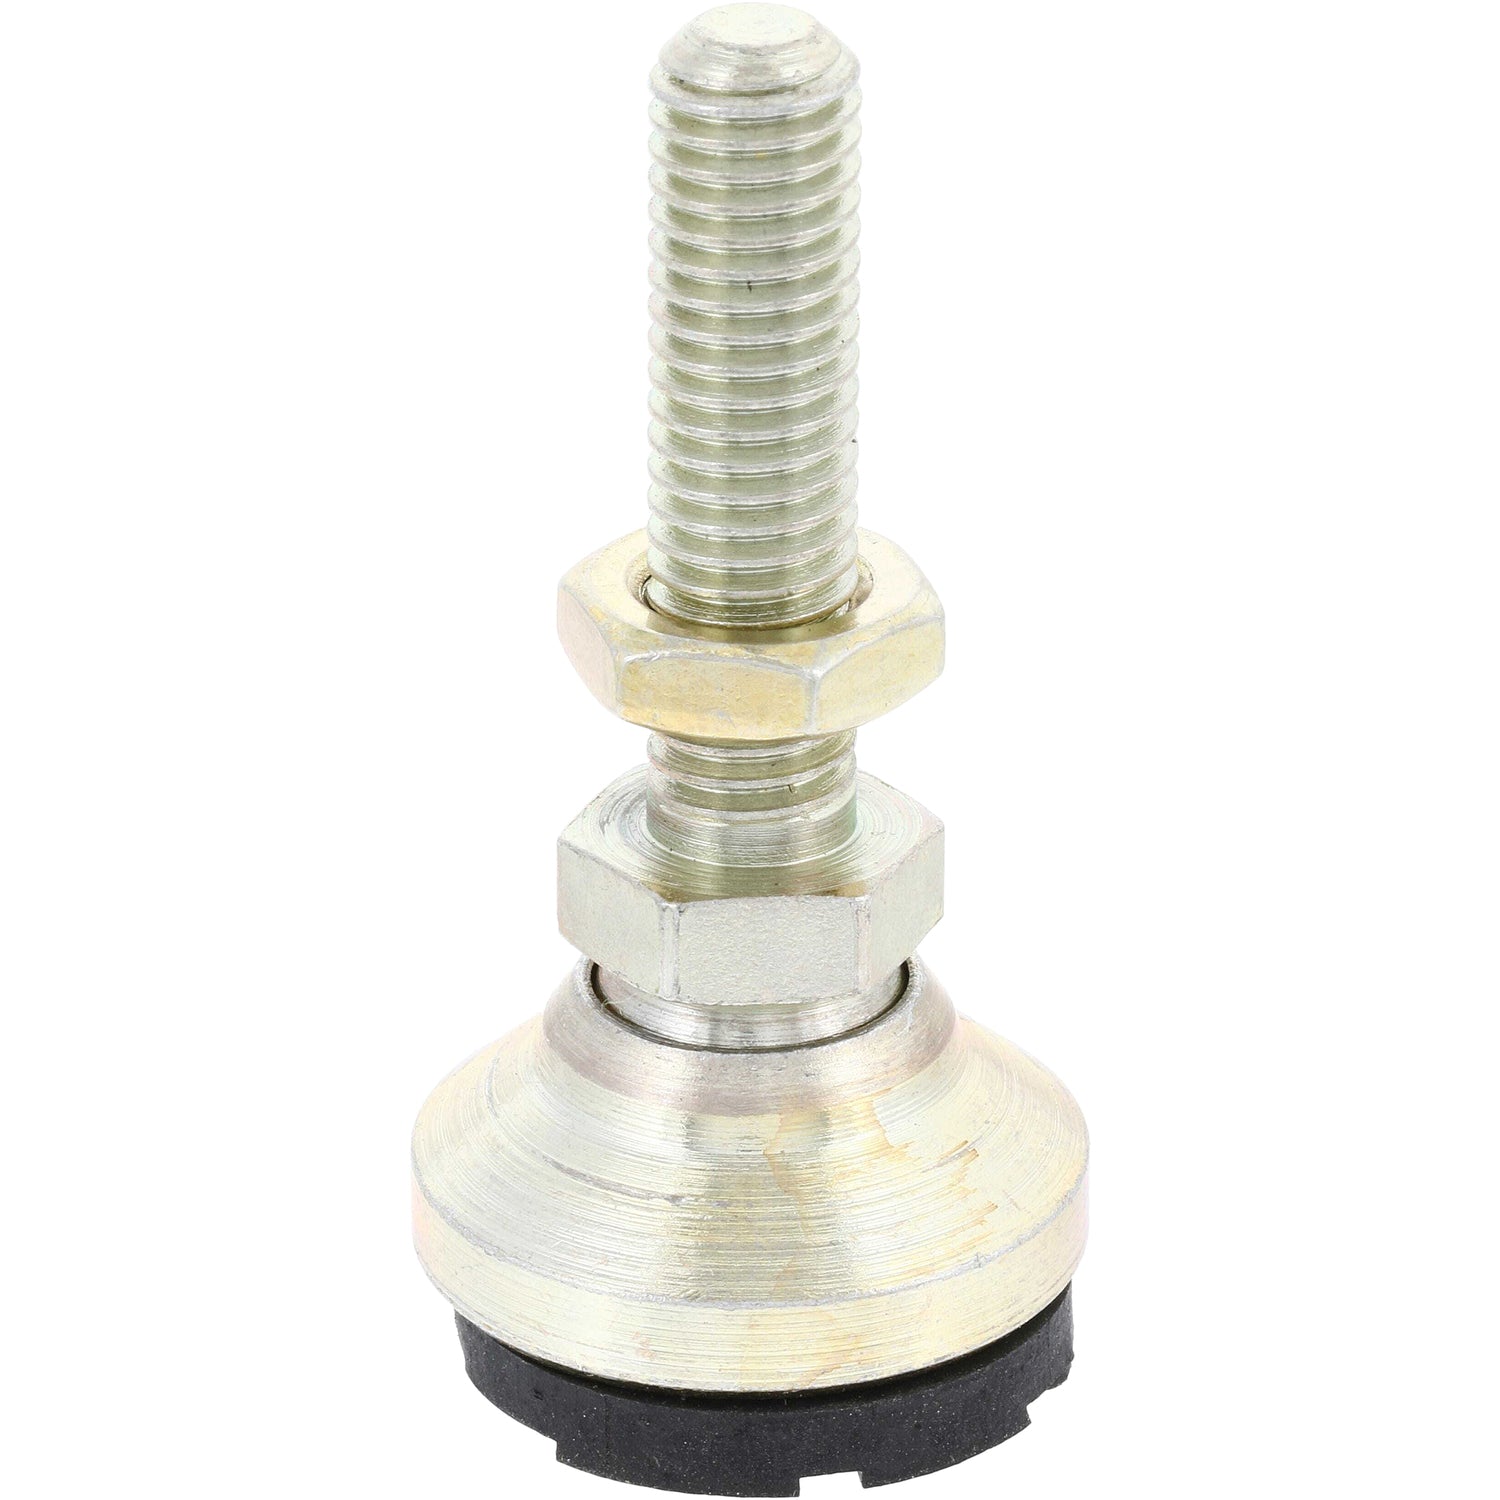 Yellow zinc-plated steel swivel leveling mount/foot with black rubber cushion and 32 mm long M8 threaded stud on white background. 